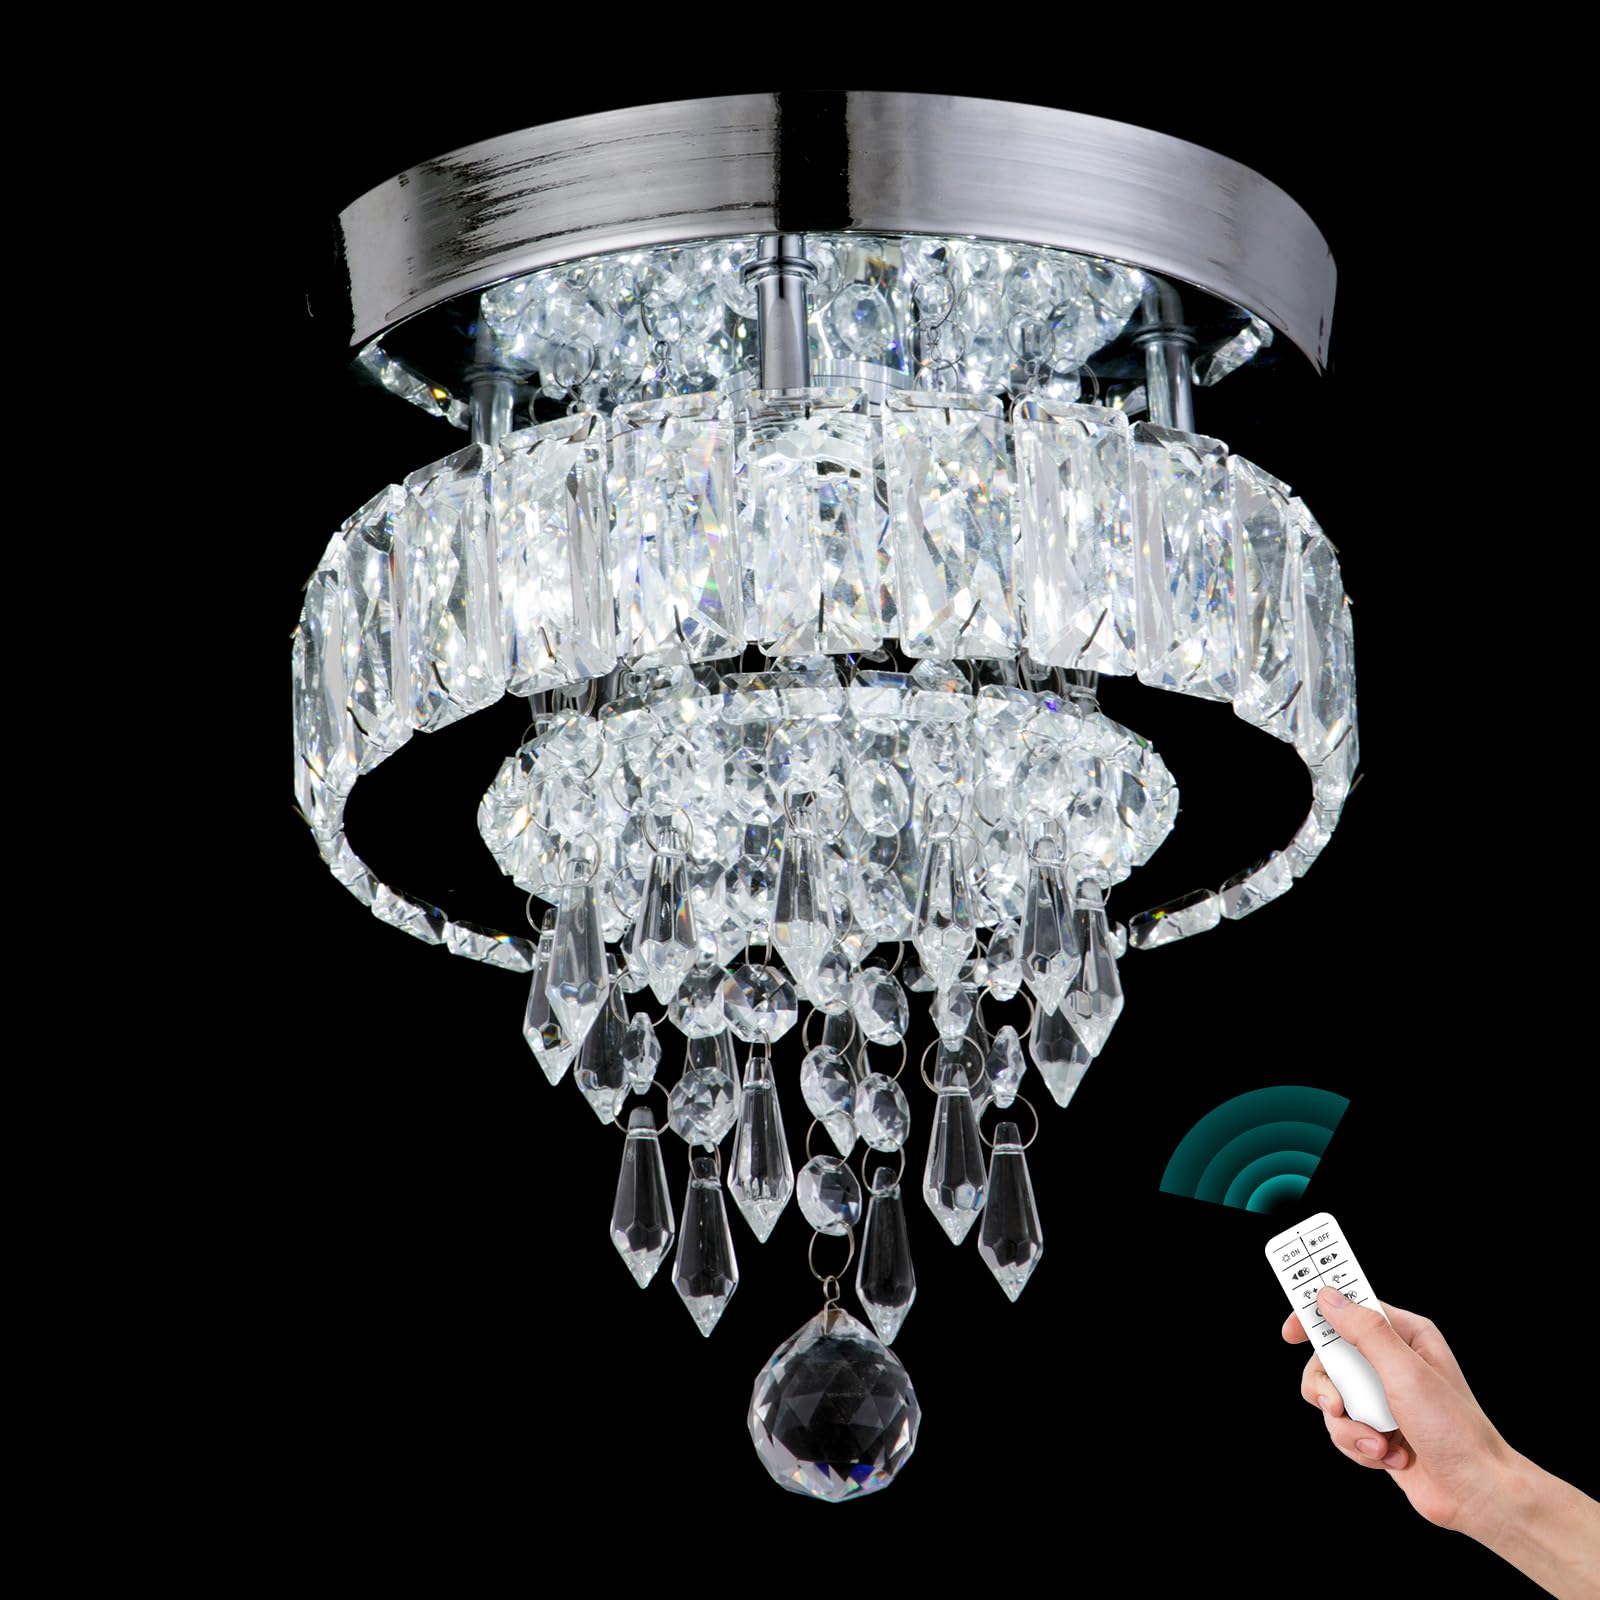 Finktonglan Dimmable Small Chandelier, Modern Crystal Chandelier with Remote, Crystal Ceiling Light H9'' x W8'' Mini Chandeliers for Bedrooms Hallway Kitchen(2700K/4500K/6500K Changeable